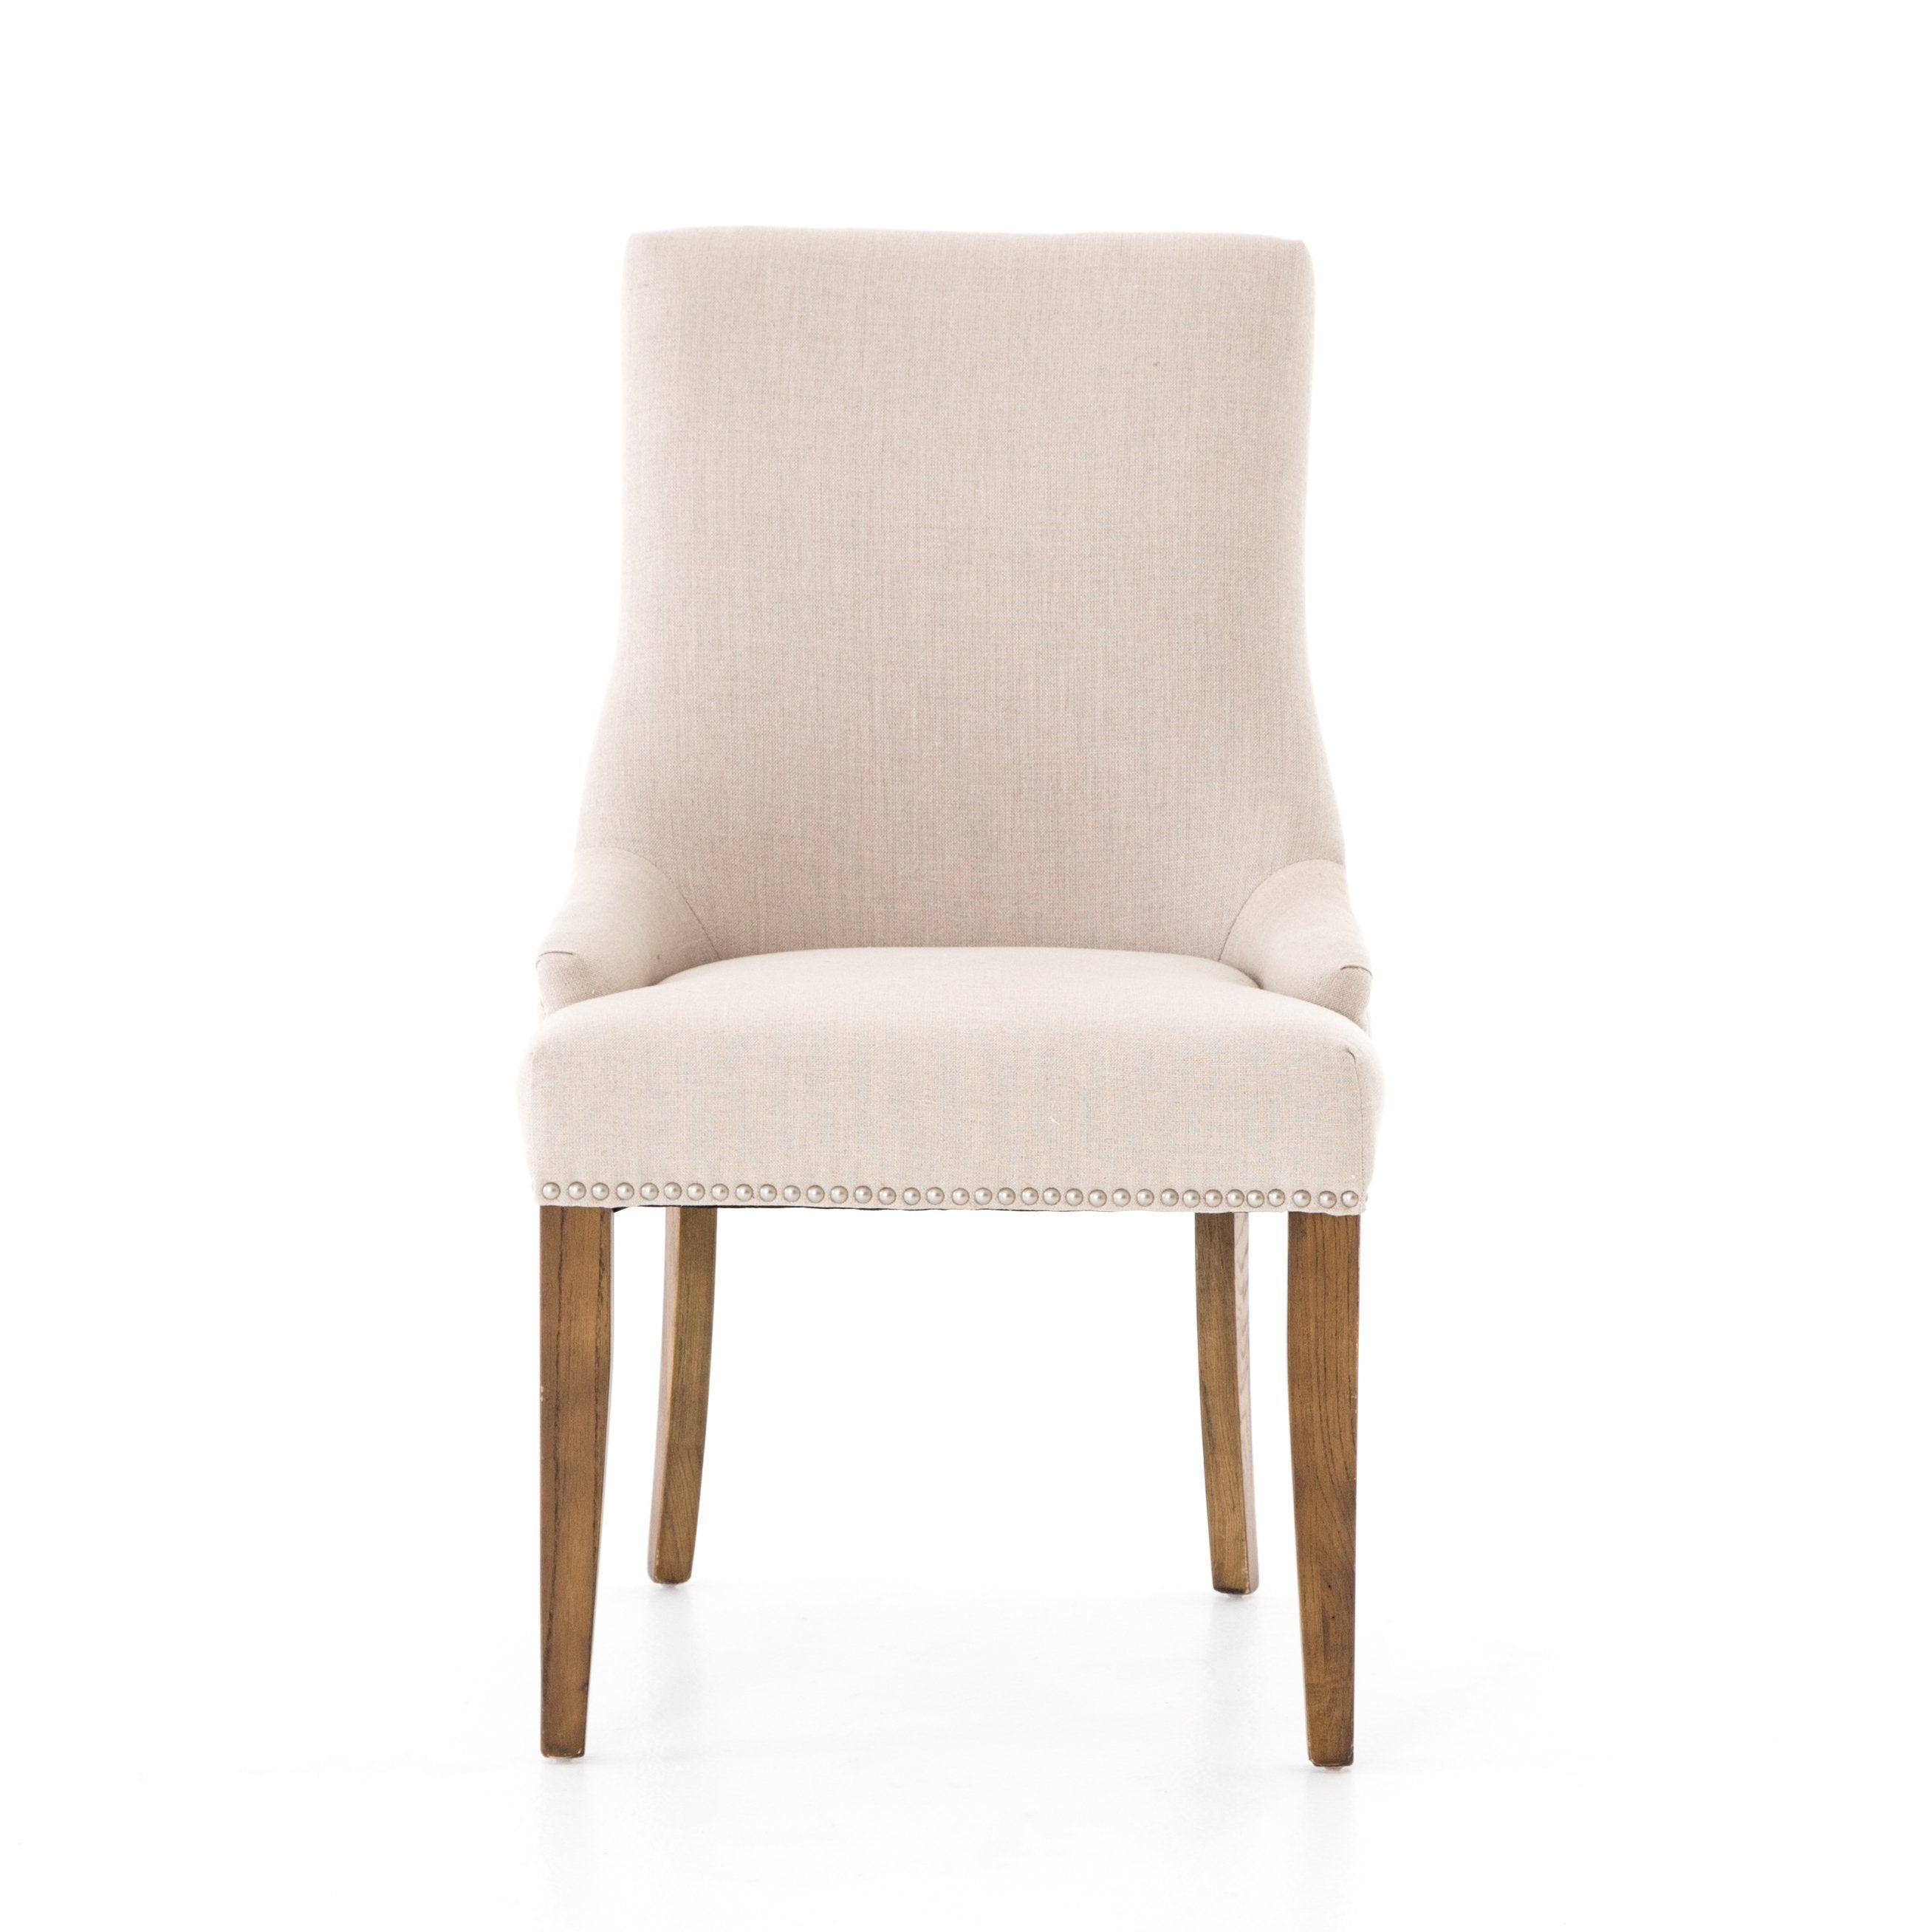 THE DALIA DINING CHAIR